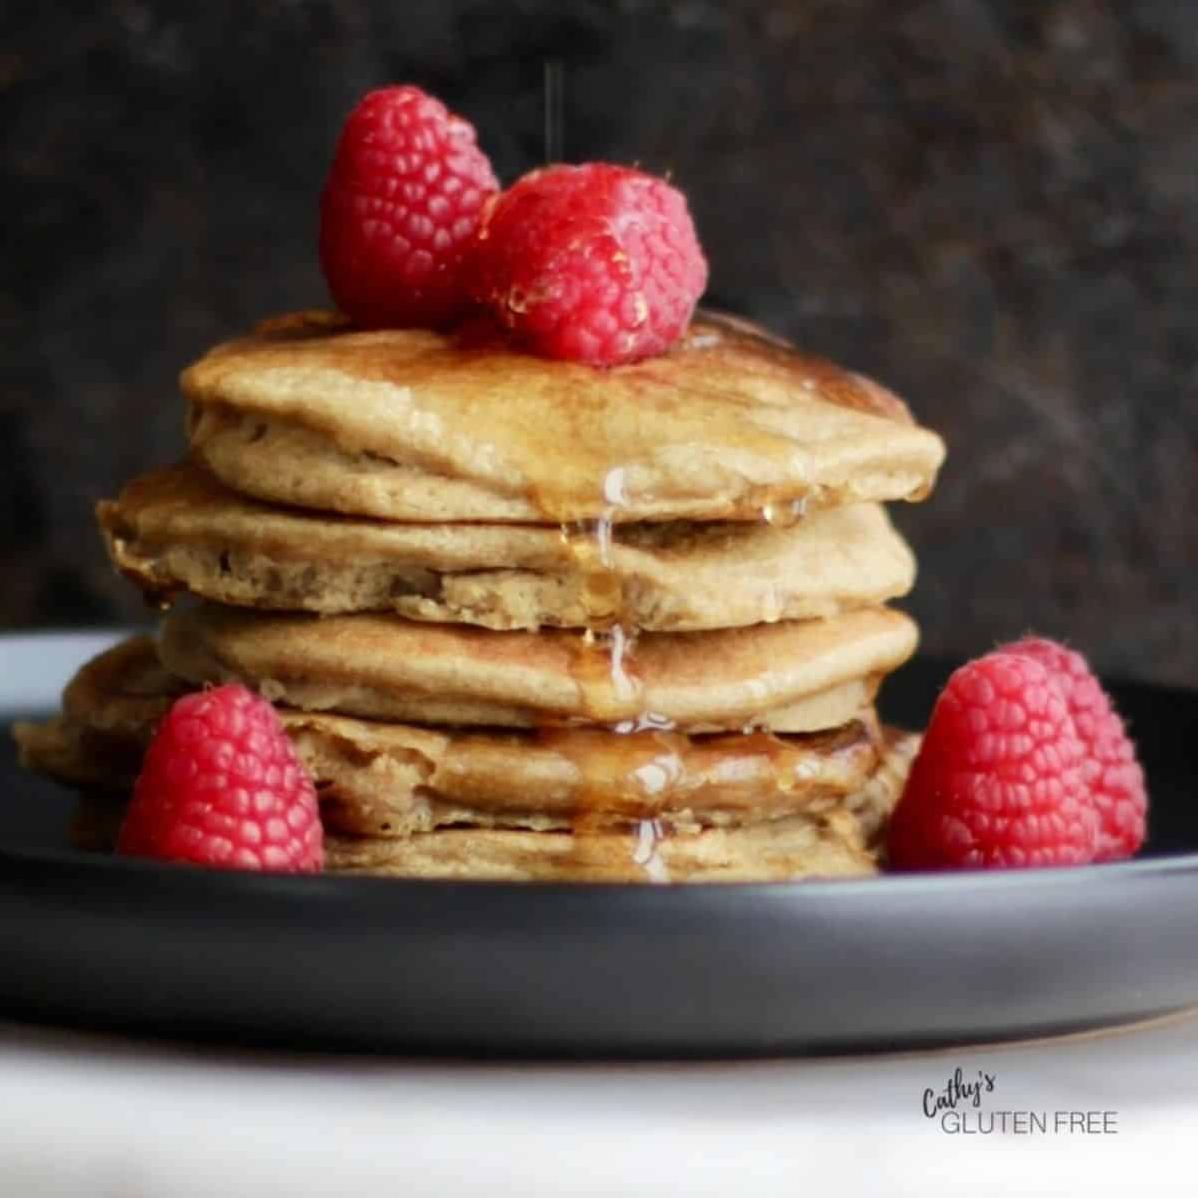  Teff flour is the magic ingredient for perfect gluten-free pancakes.